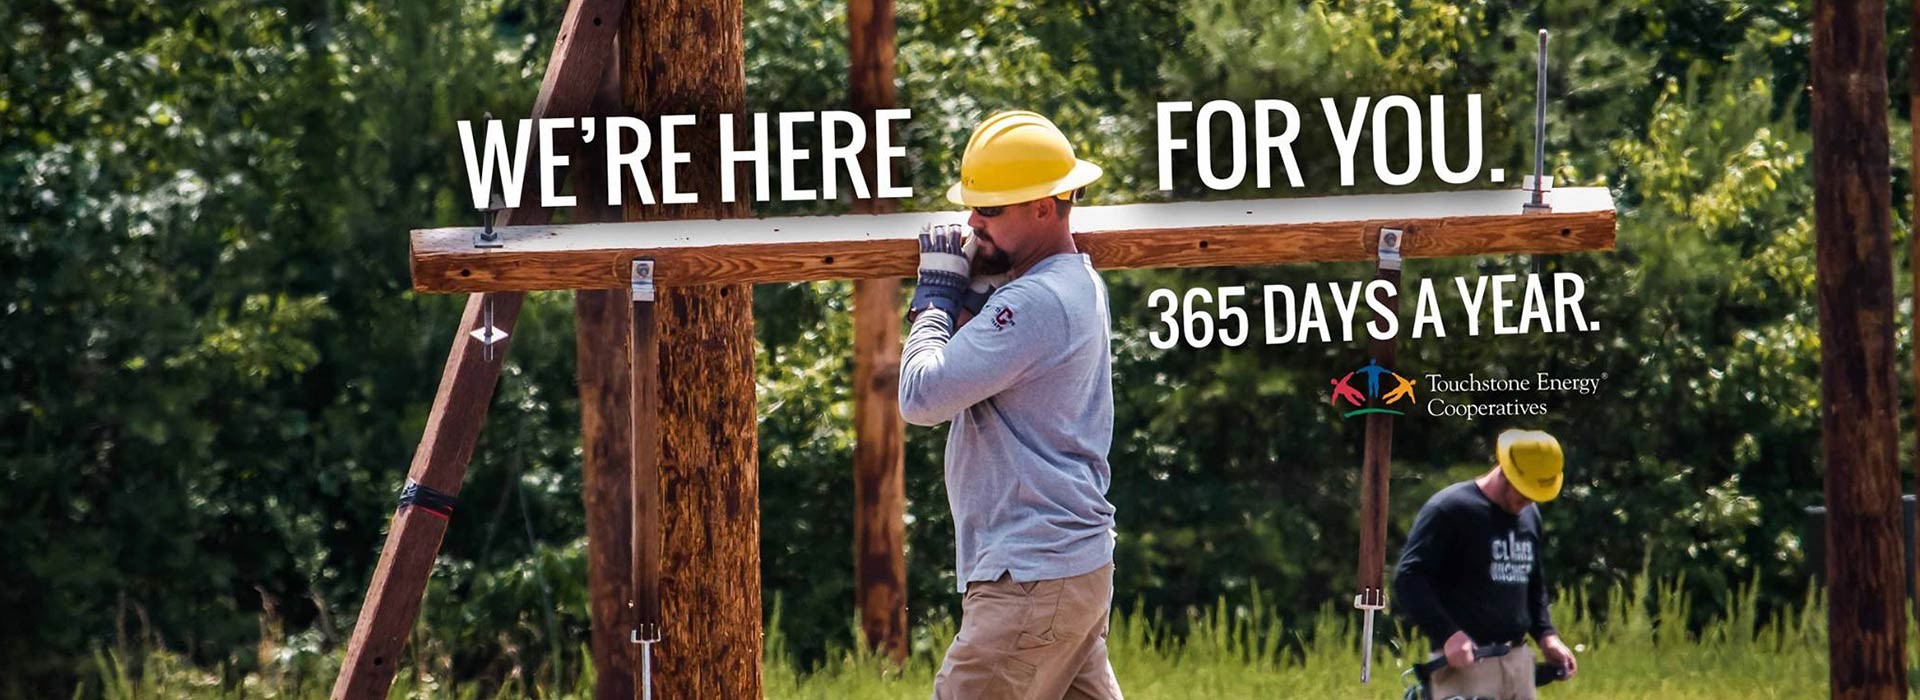 We're here for you. 365 Days a Year. (Man working on power pole)